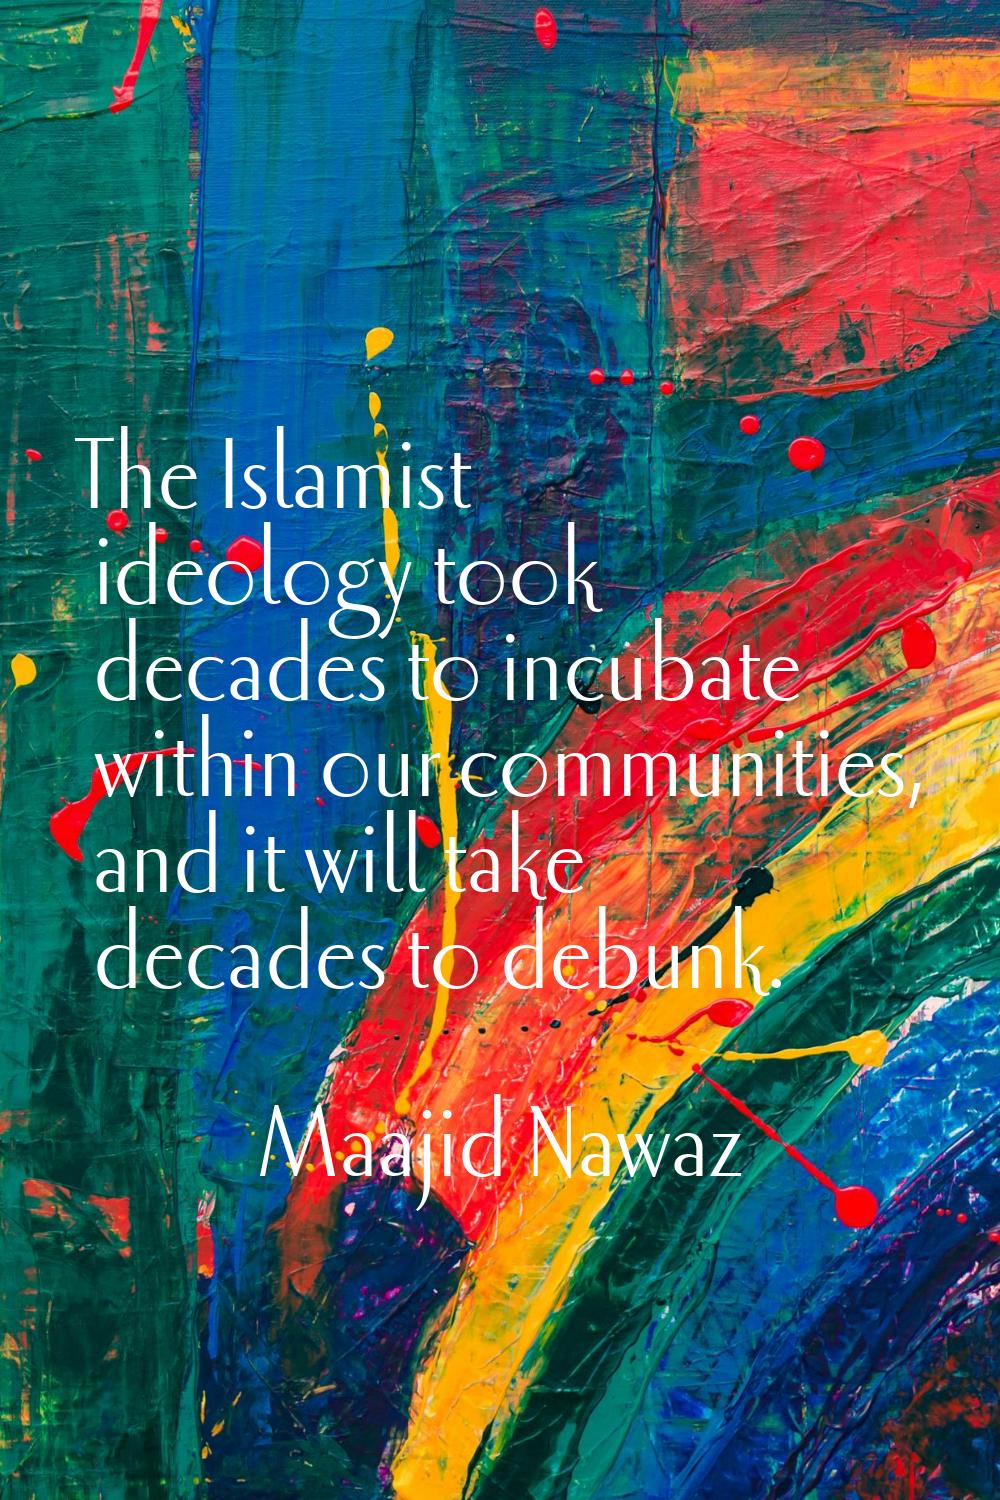 The Islamist ideology took decades to incubate within our communities, and it will take decades to 